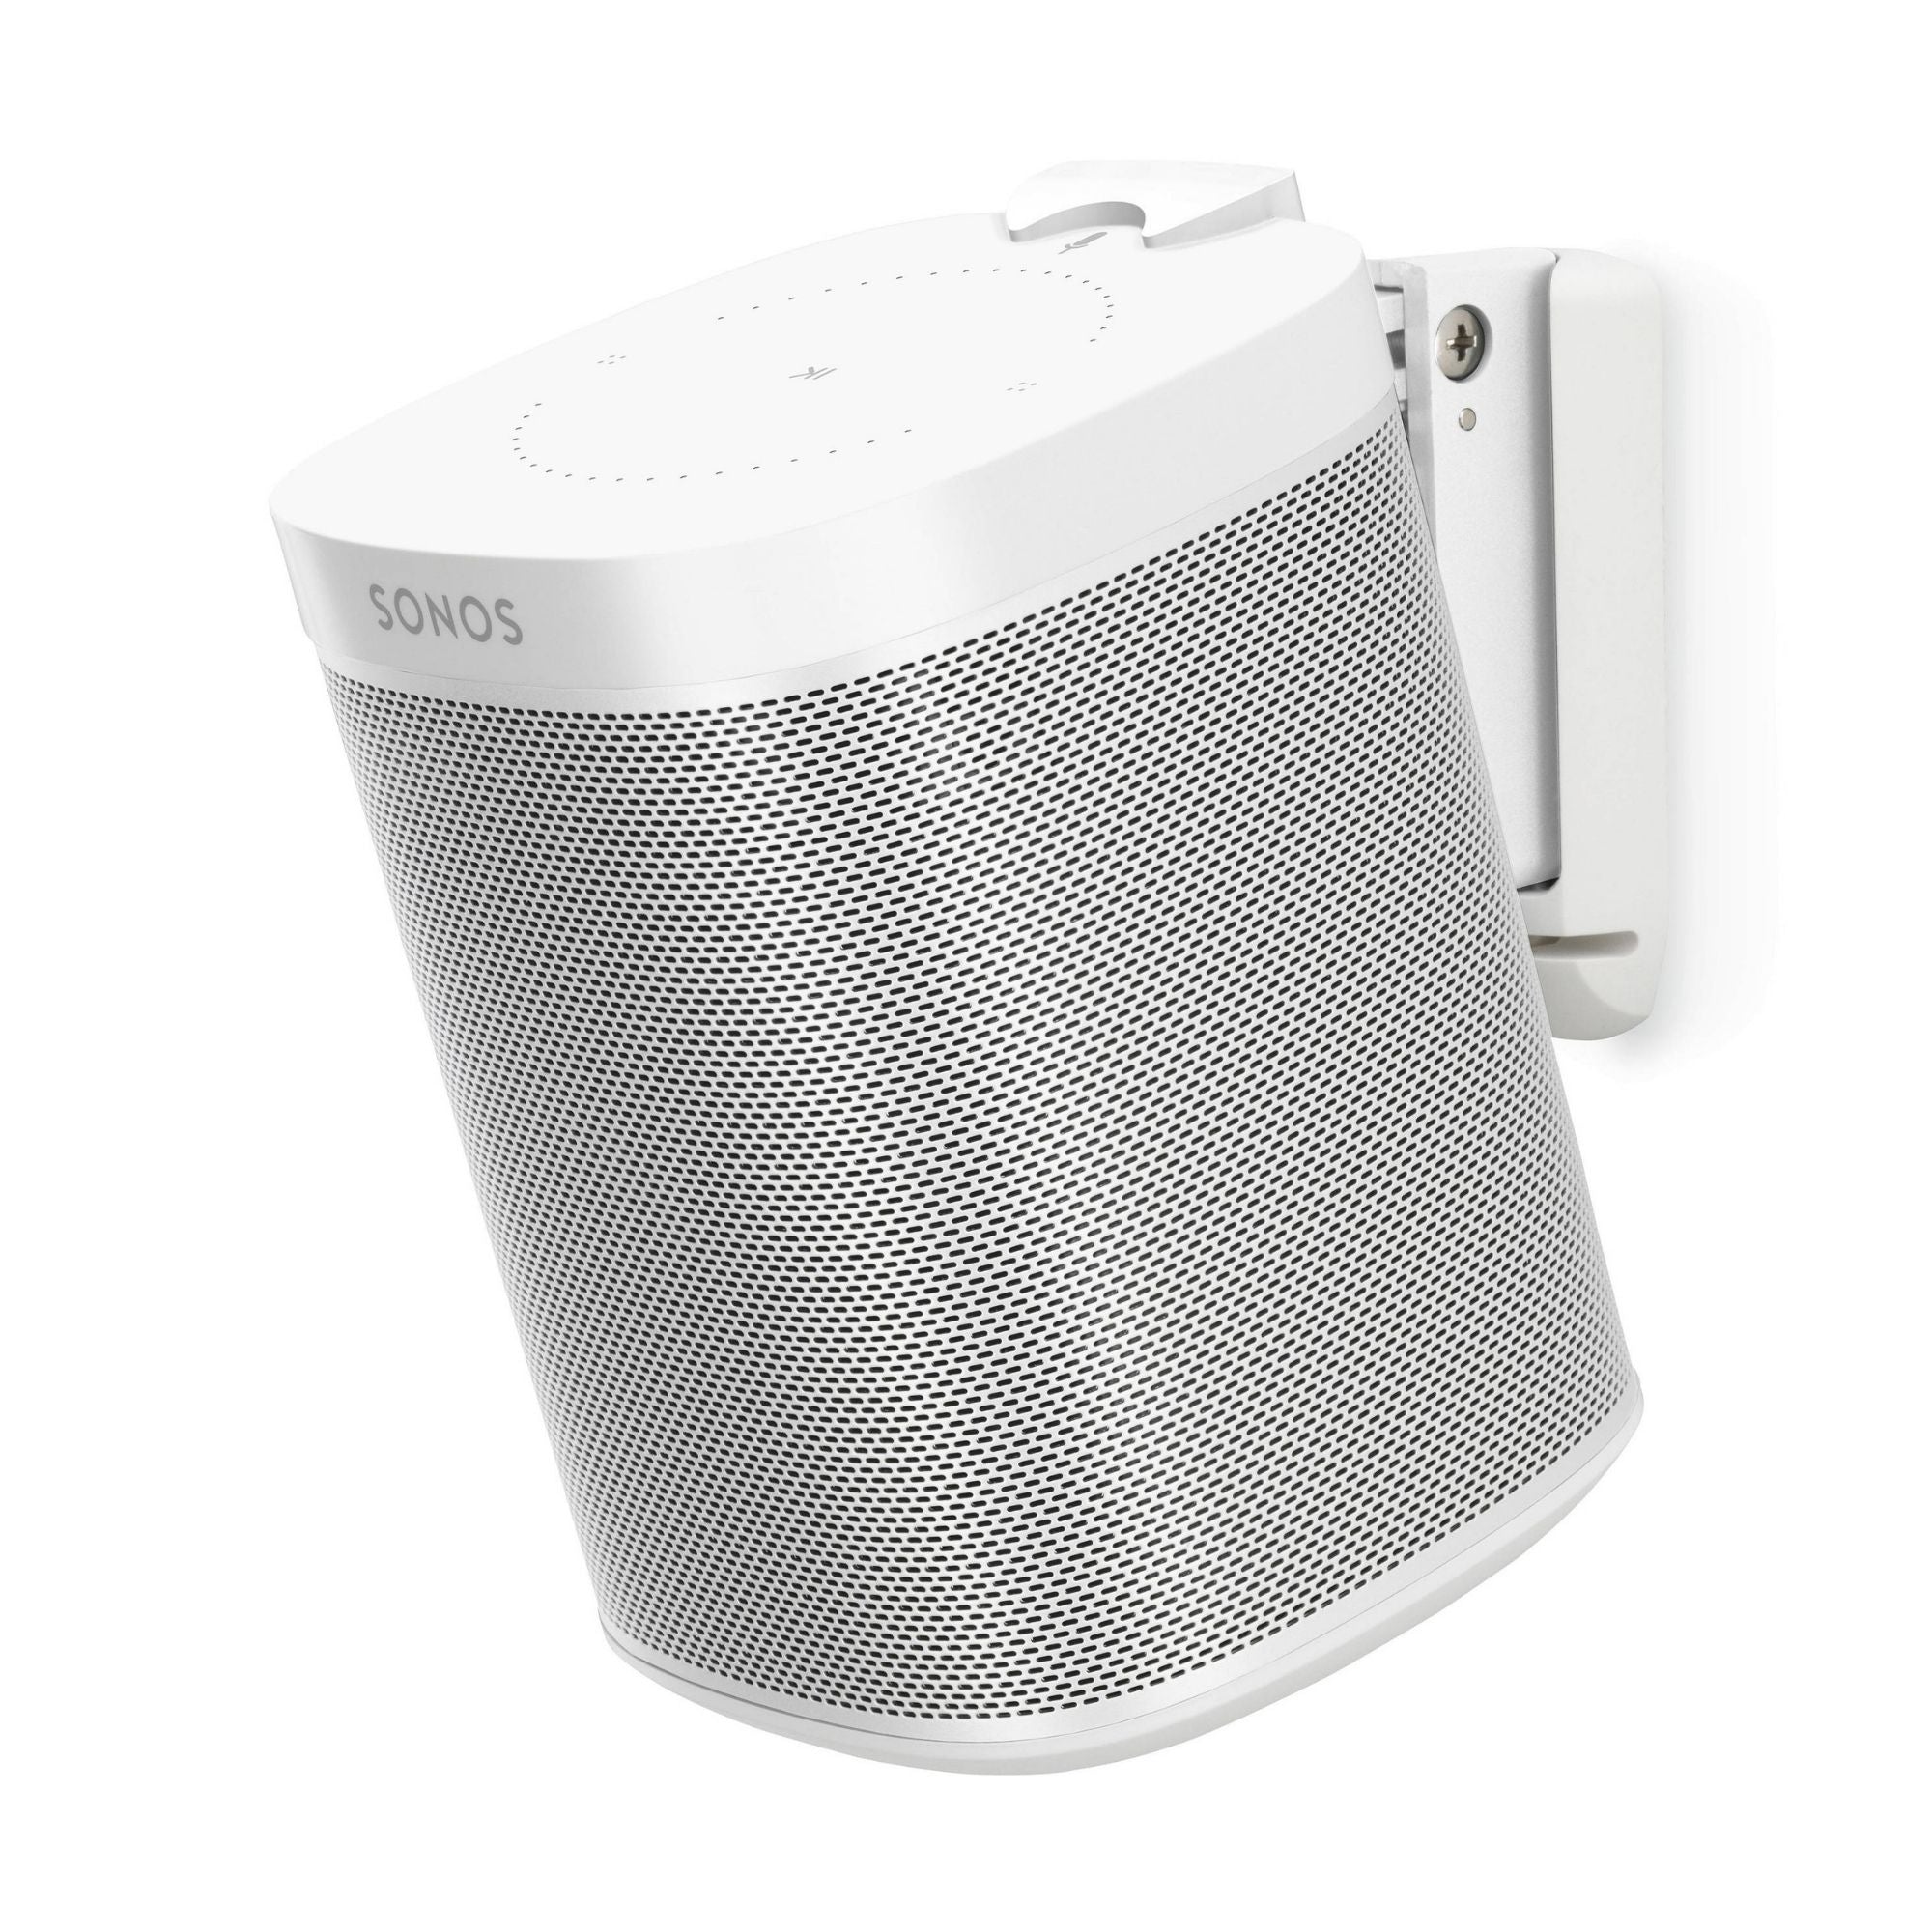 Sonos Flexson Wall Mount for Sonos One, One SL and Play:1 - AVStore